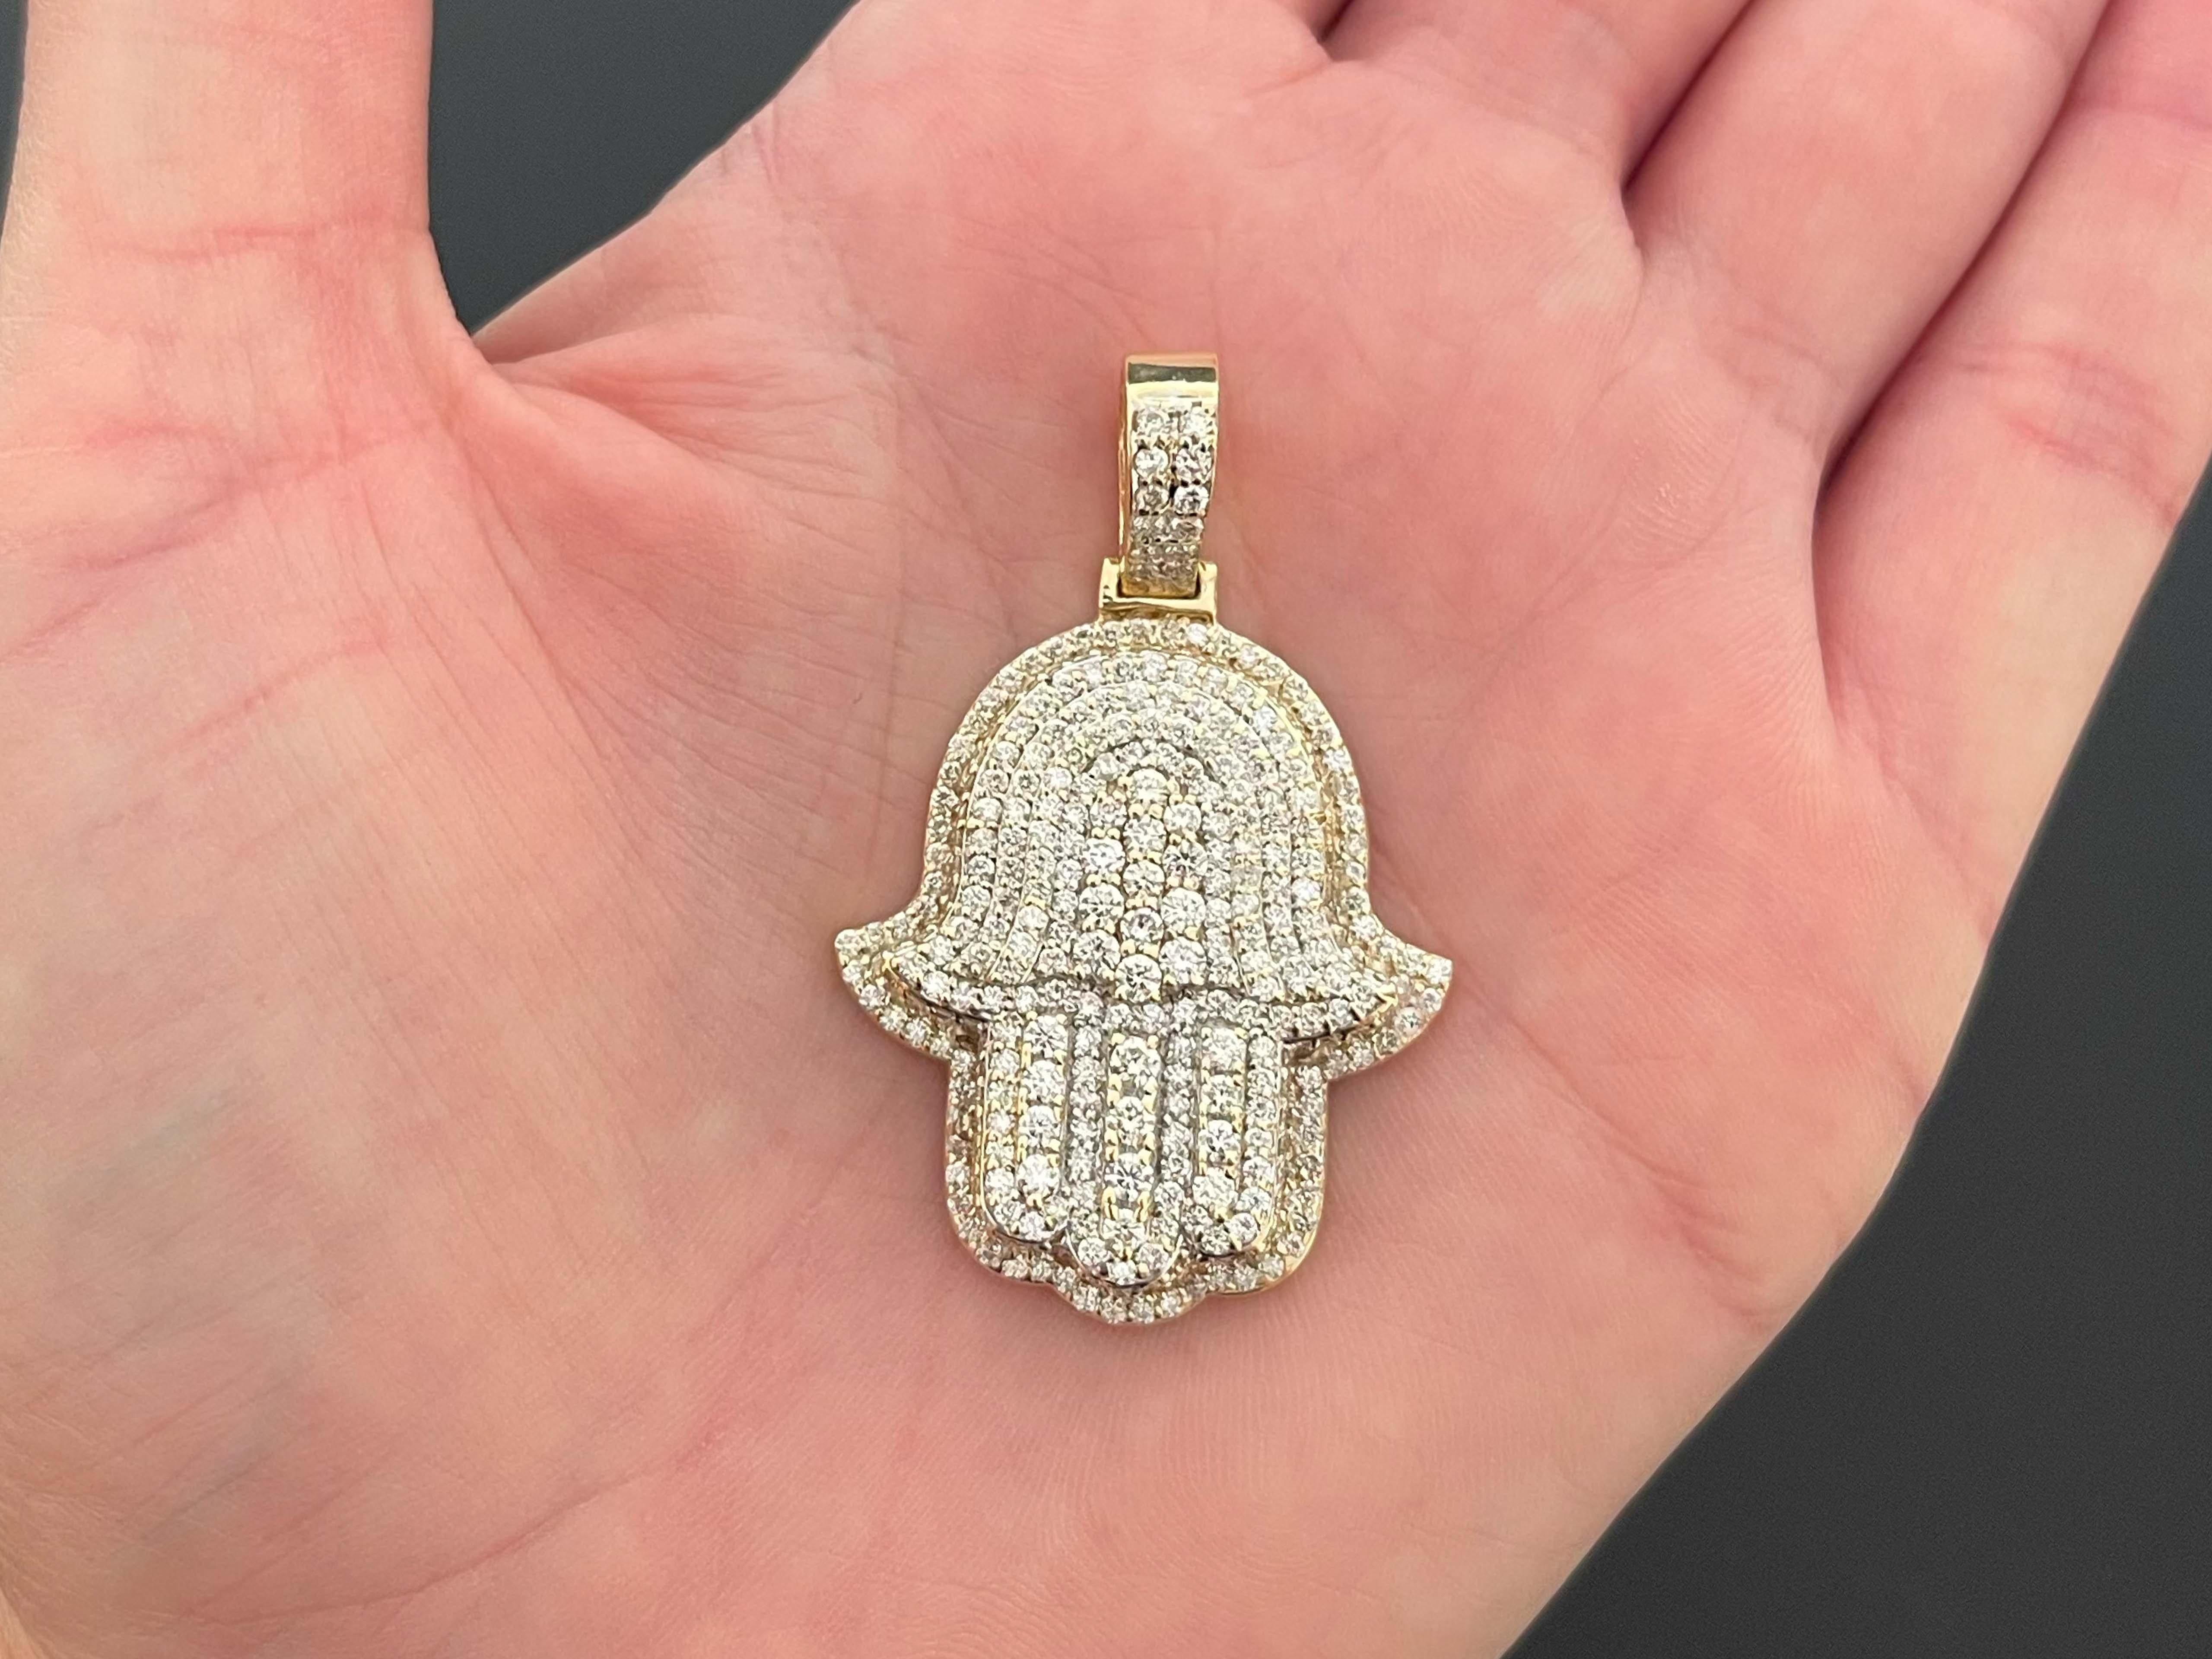 Hamsa Diamond Pendant in 14k Yellow Gold. This stunning pendant is set with ~369 diamonds, sparkling at all angles. The diamonds are G-H in color and VS2-SI1 in clarity. The diamonds weigh a total of 2.53 carats and have amazing sparkle. The pendant